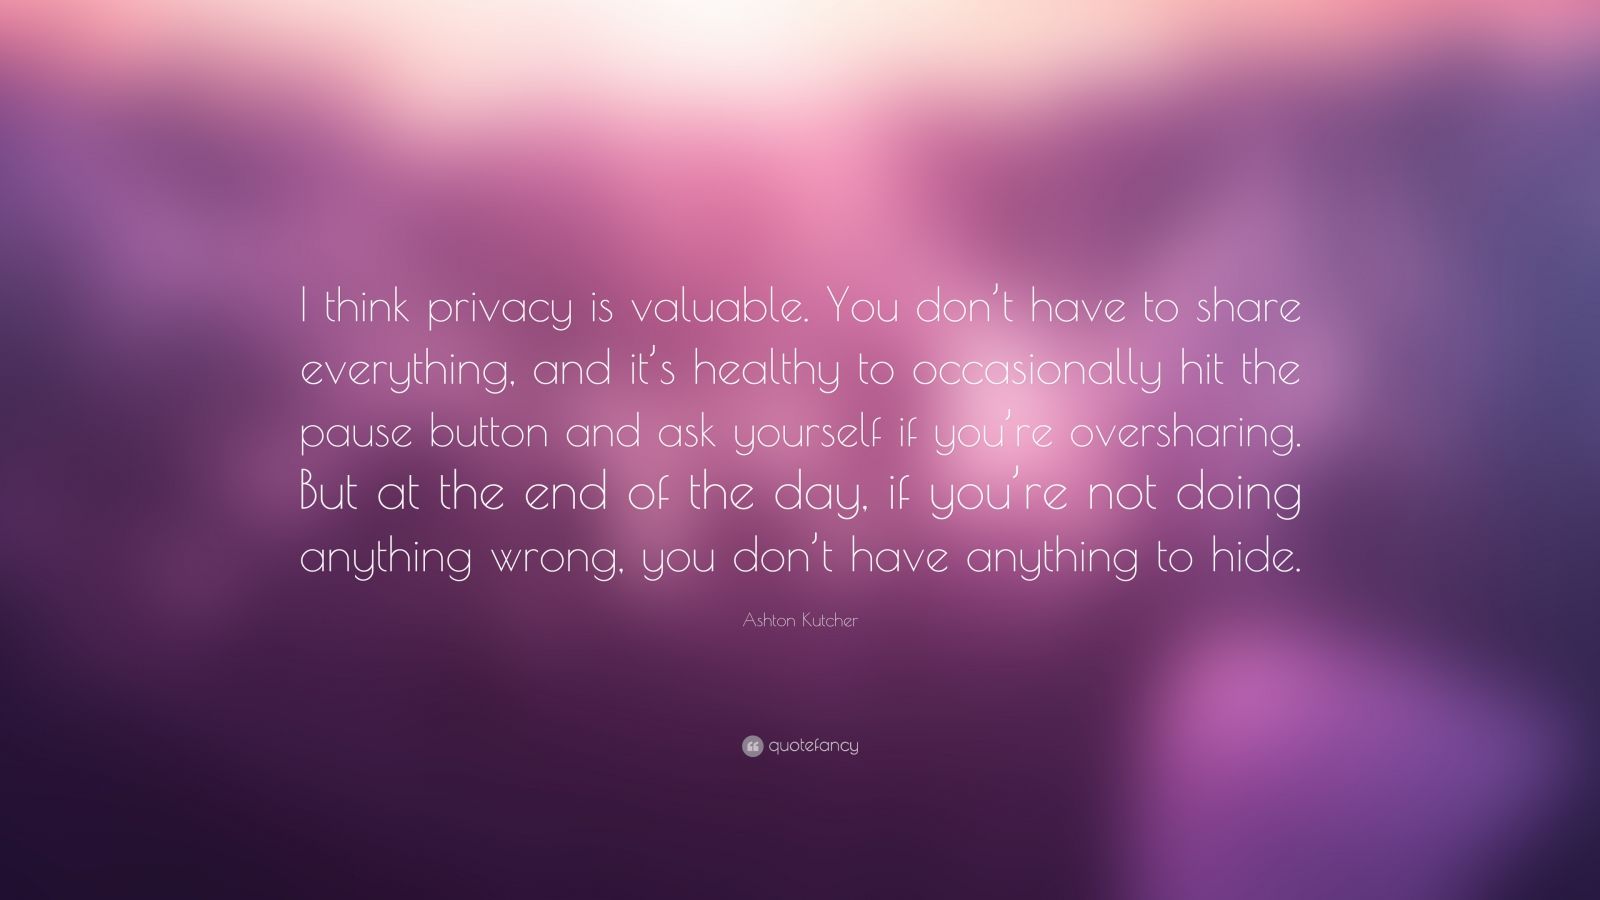 Ashton Kutcher Quote: “I think privacy is valuable. You don’t have to ...